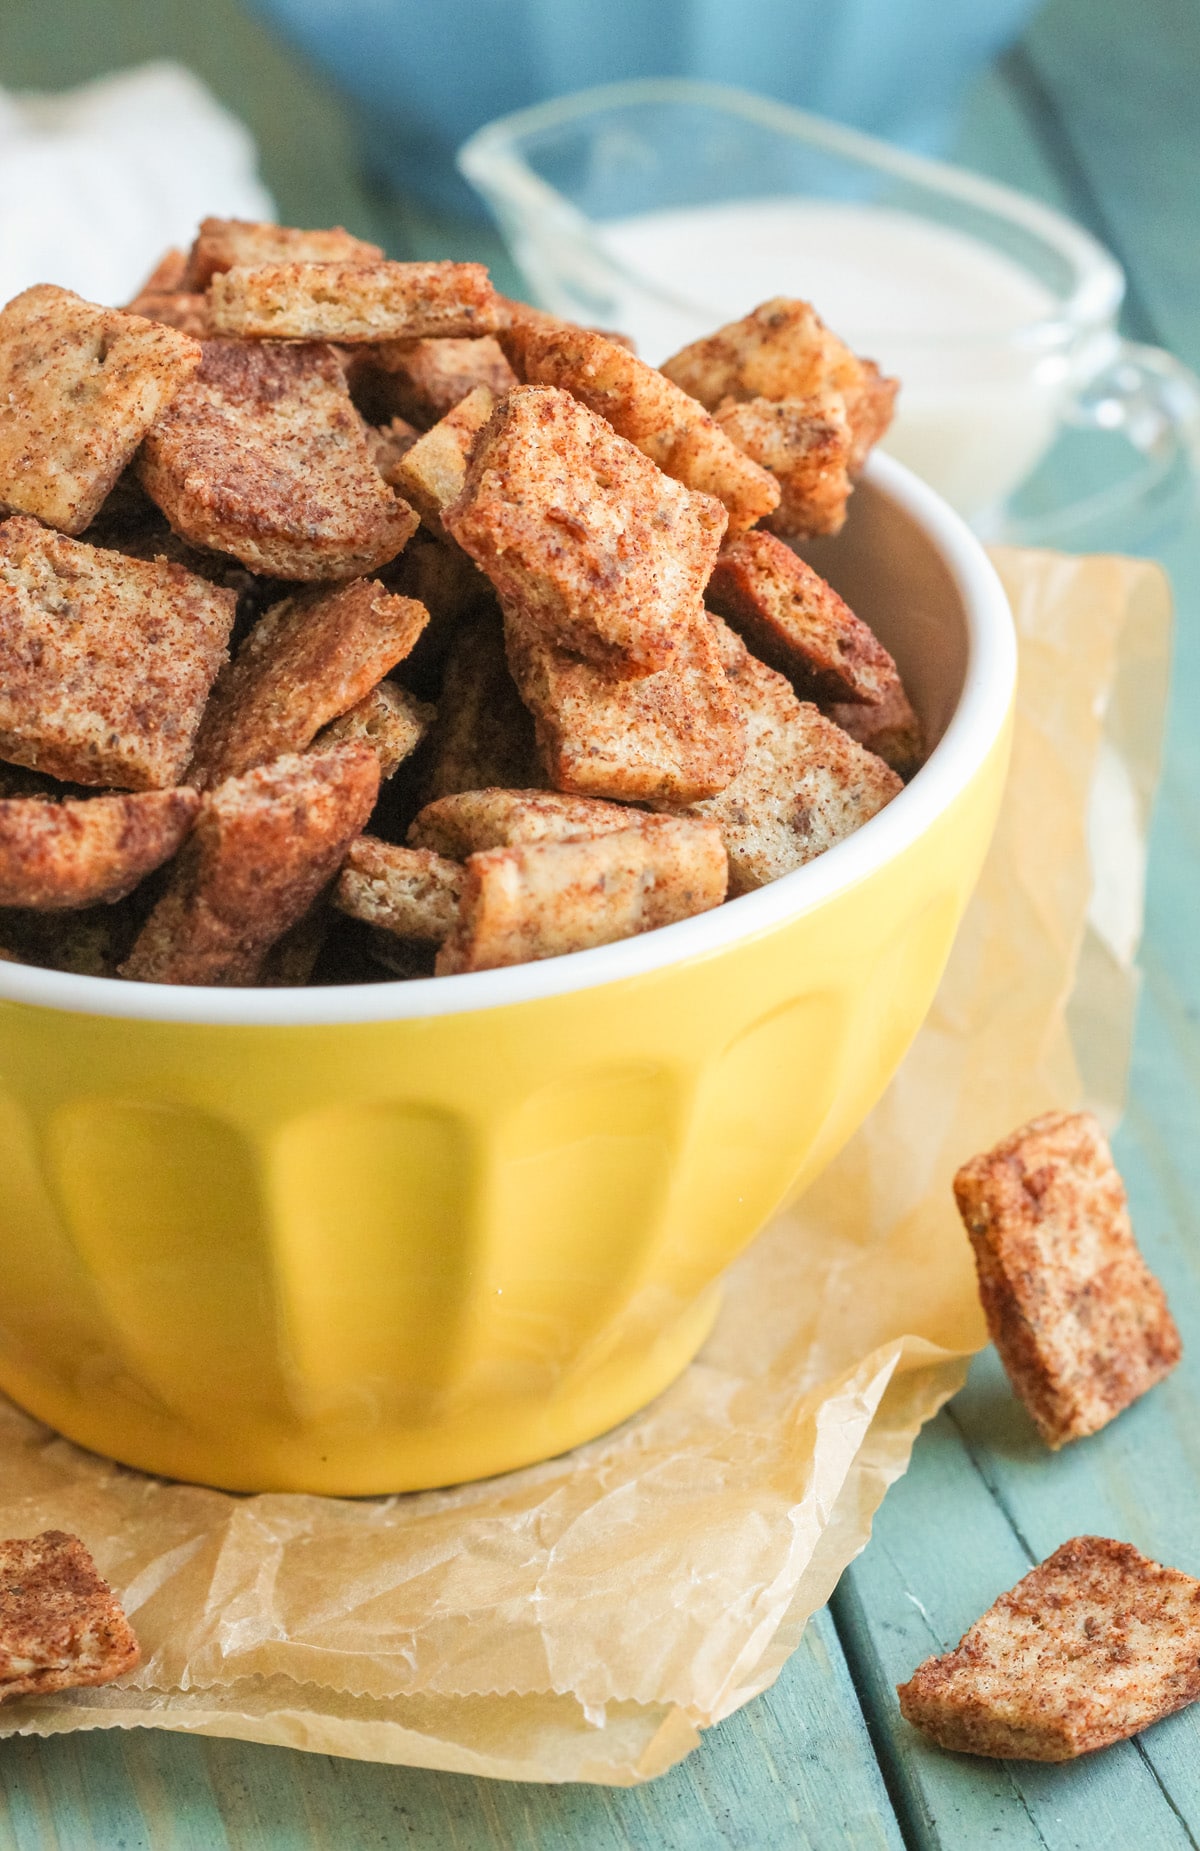 This Healthy Cinnamon Crunch Toast Cereal tastes just like the storebought version. But GUESS WHAT? This healthy homemade version is made without the added sugar, preservatives, and unnecessary additives. This Homemade Cinnamon Toast Crunch is low in sugar, all natural, and even vegan! -- Healthy Dessert Recipes with low calorie, low fat, high protein, and gluten free options at the Desserts With Benefits Blog (www.DessertsWithBenefits.com)